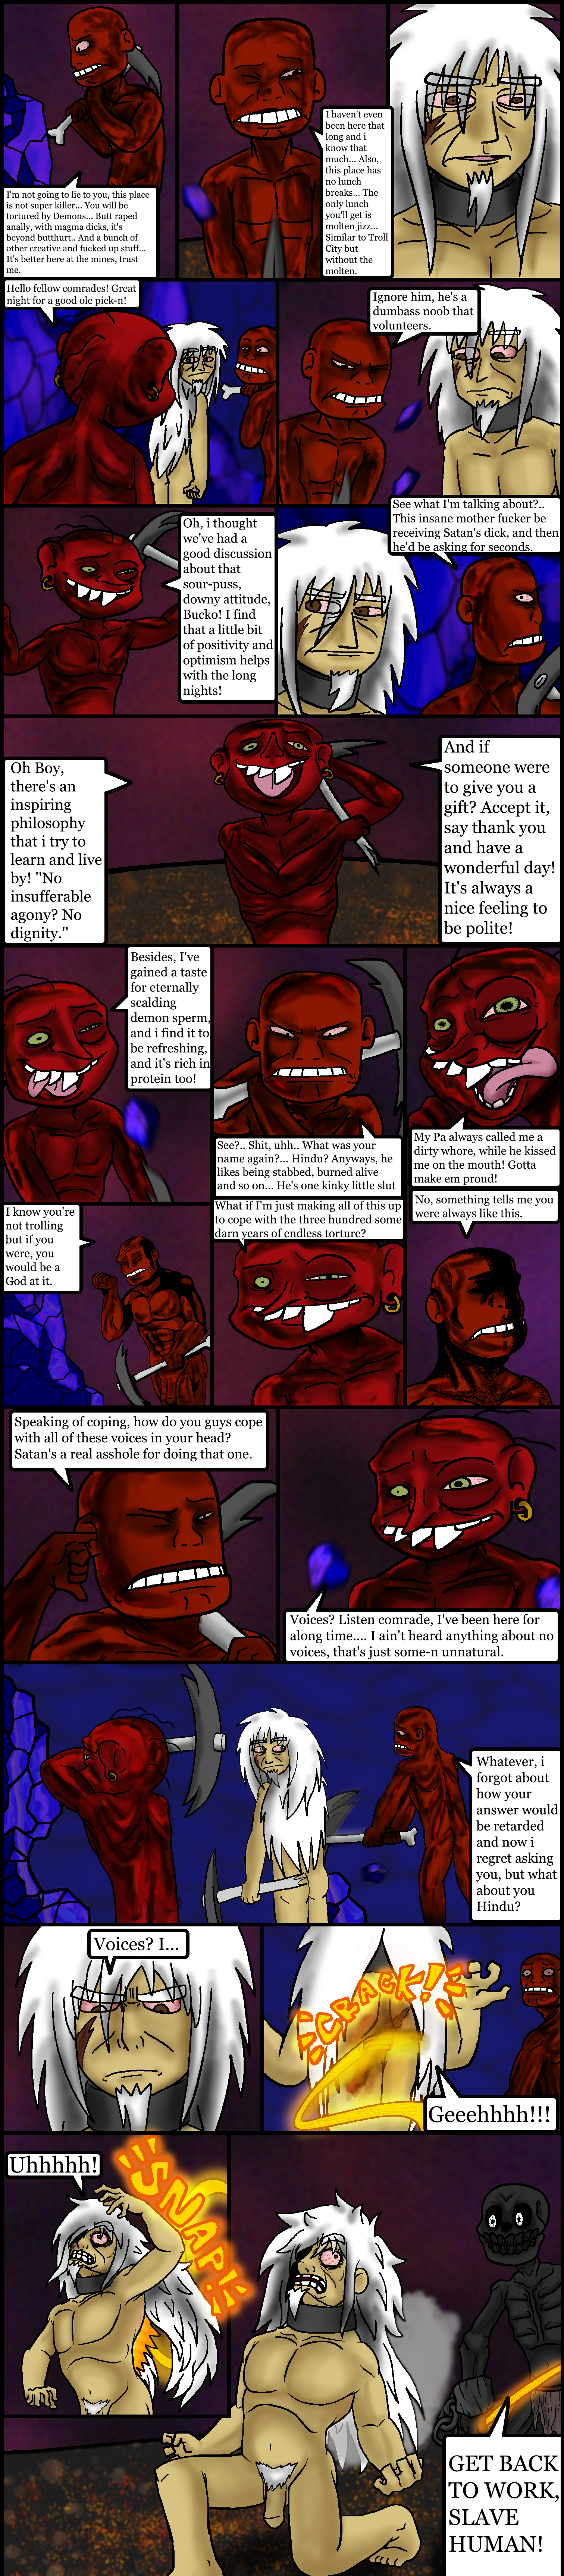 ch25.5/pg13.png. If you're seeing this, enable images. Or, perhaps we have a website issue. Try refreshing, if unsuccessful email c@commodorian.org with a detailed description of how you got here.